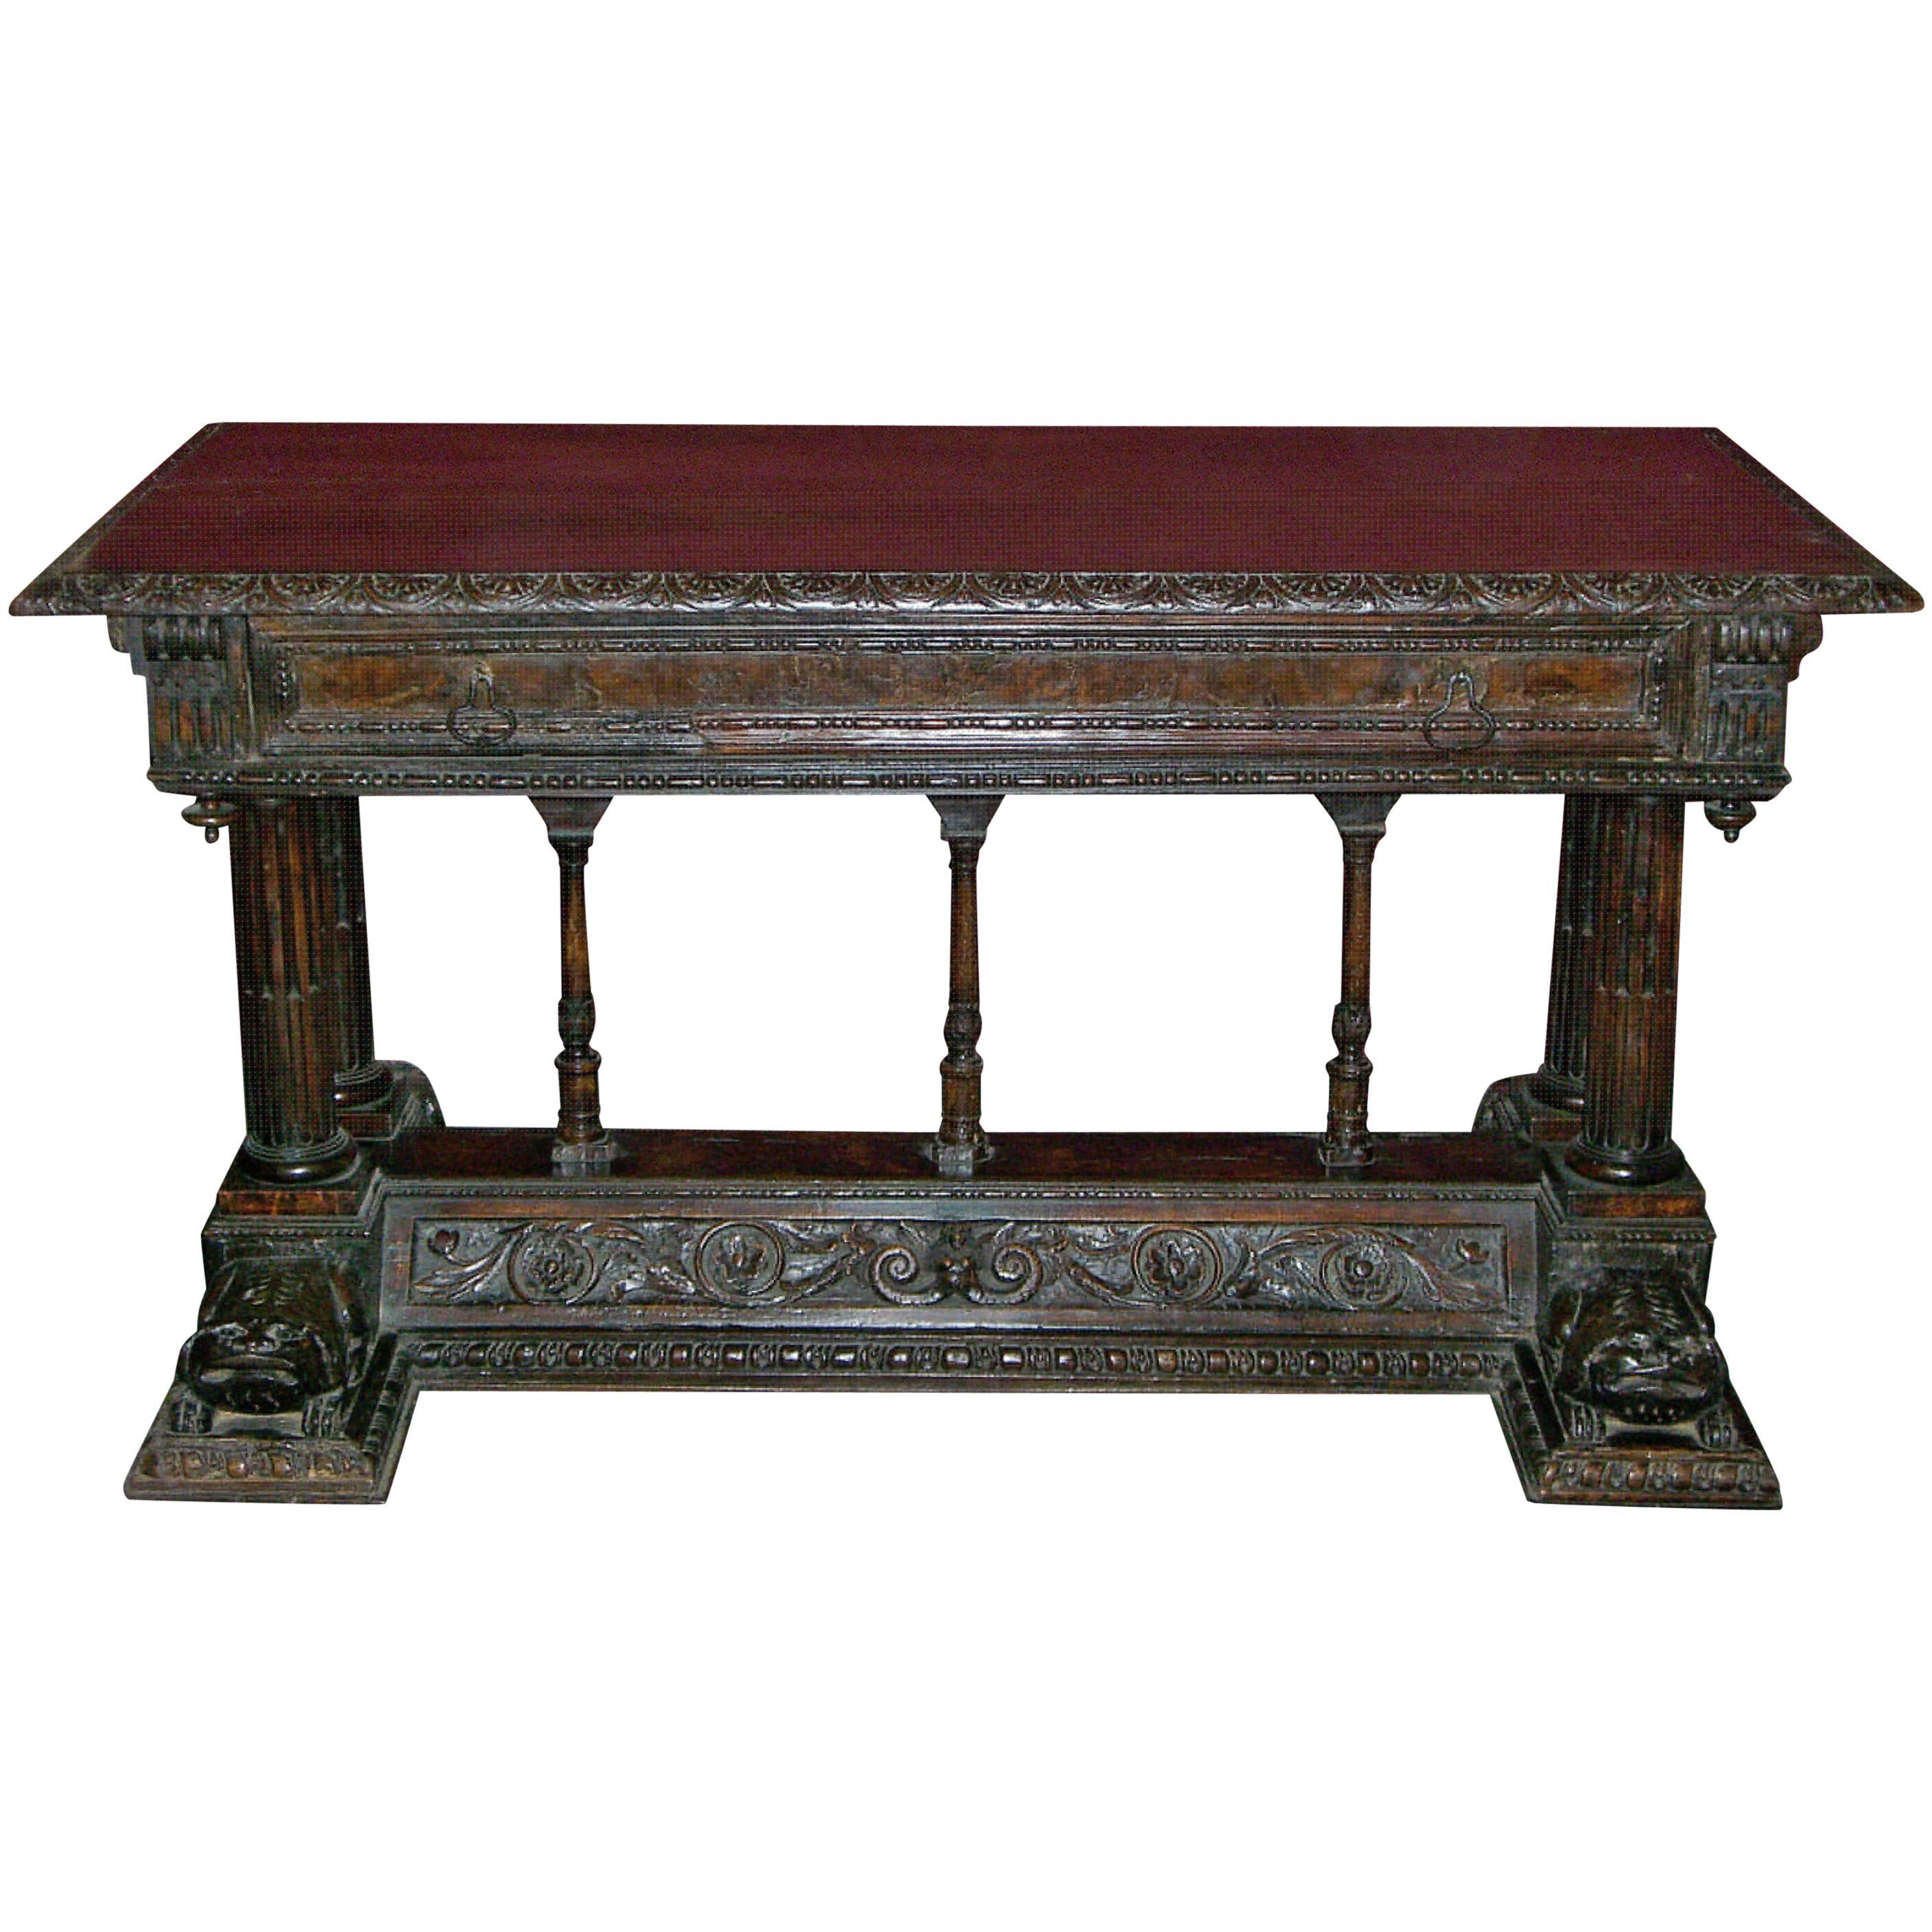 Spanish Renaissance Hand-Carved Walnut Table, 16th Century and Later